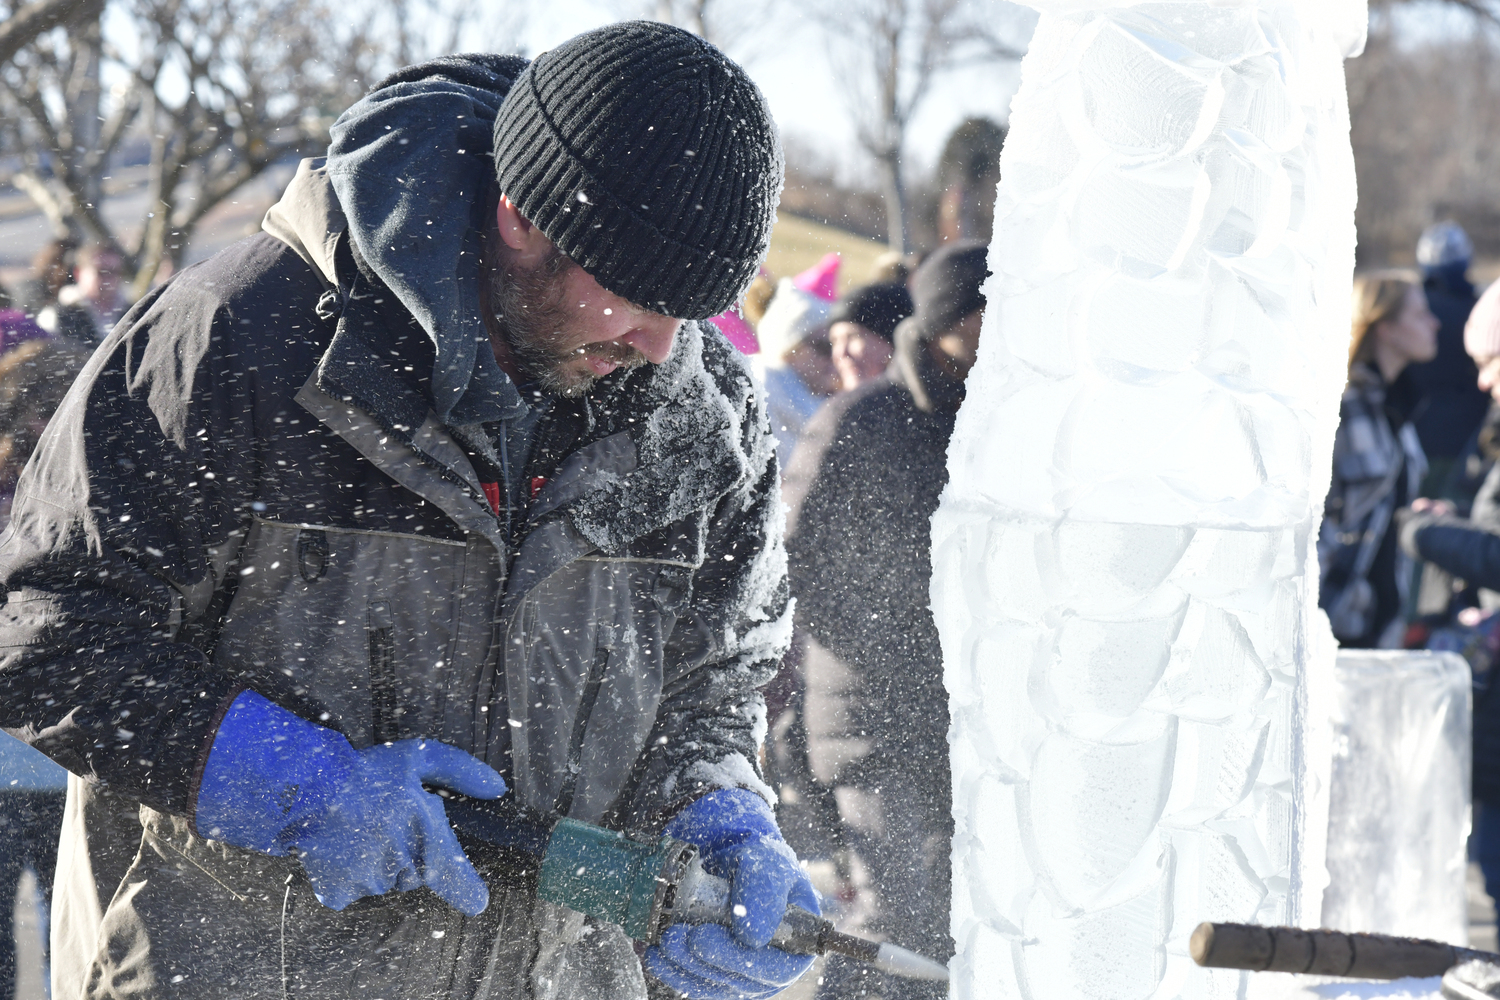 Richard Daly works on an ice sculpture on Long Wharf on Saturday.